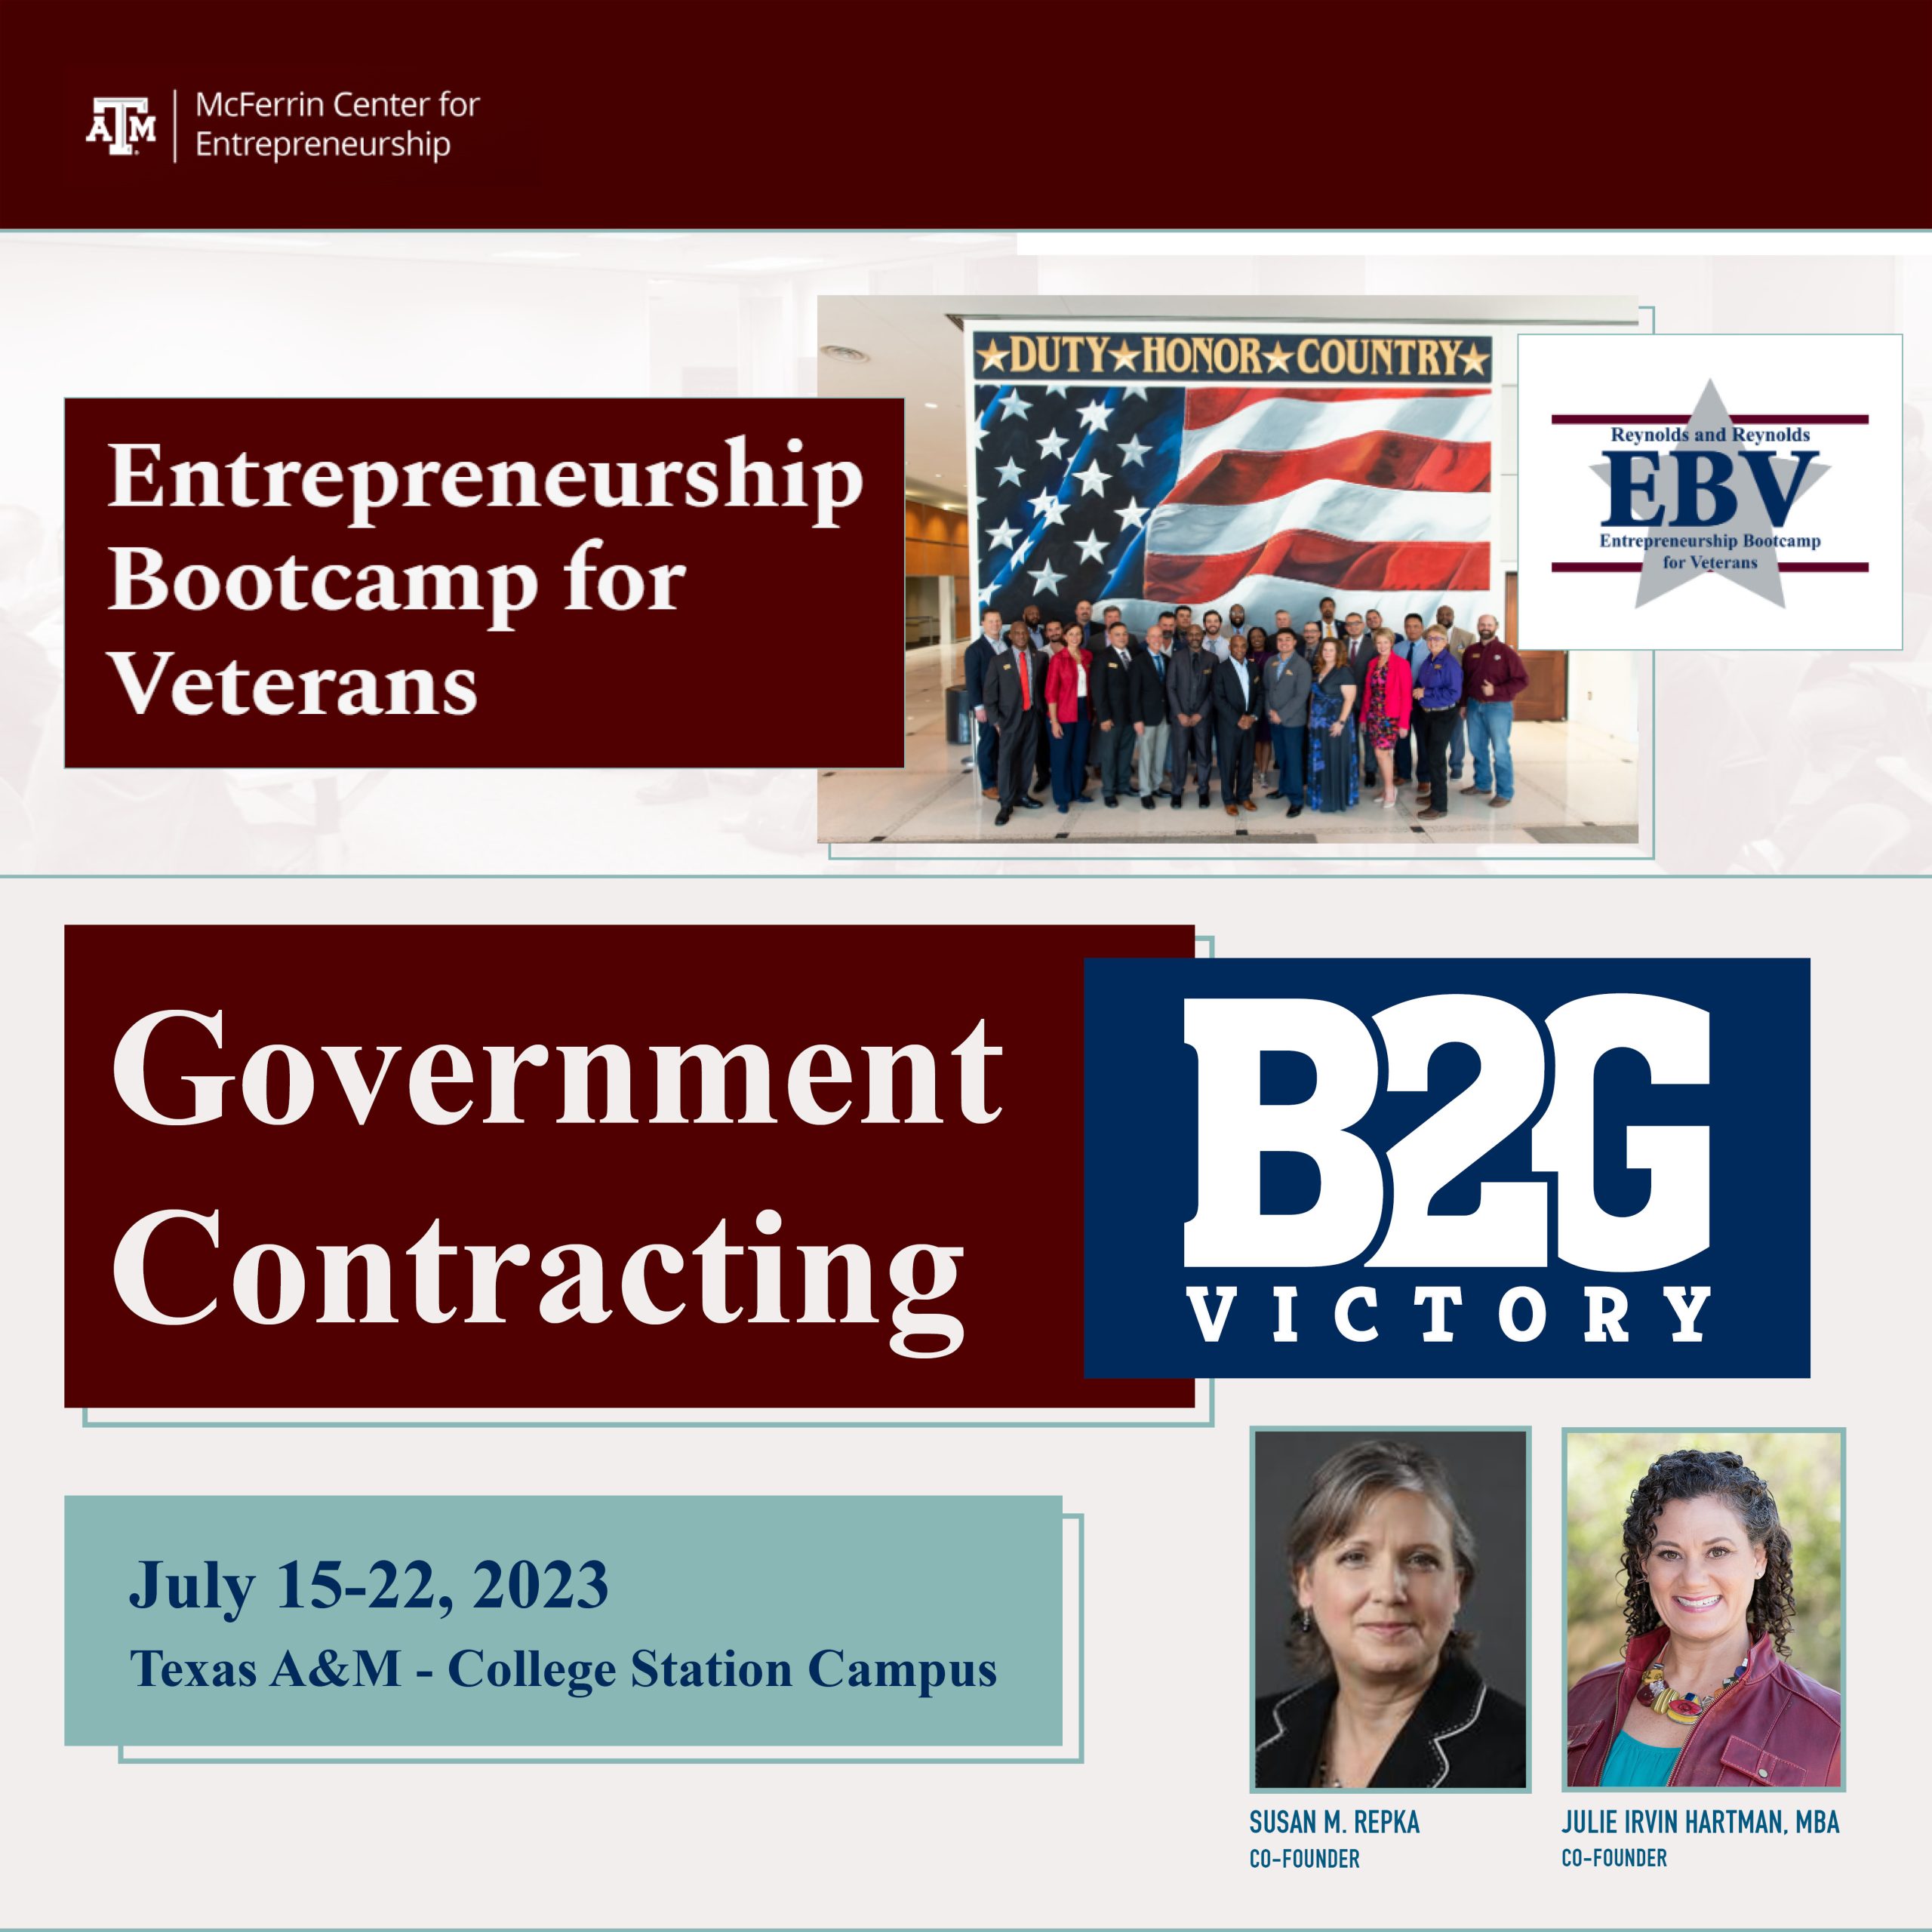 Reynolds and Reynolds Entrepreneur Bootcamp for Veterans at Texas A&M – Government Contracting with B2G VICTORY